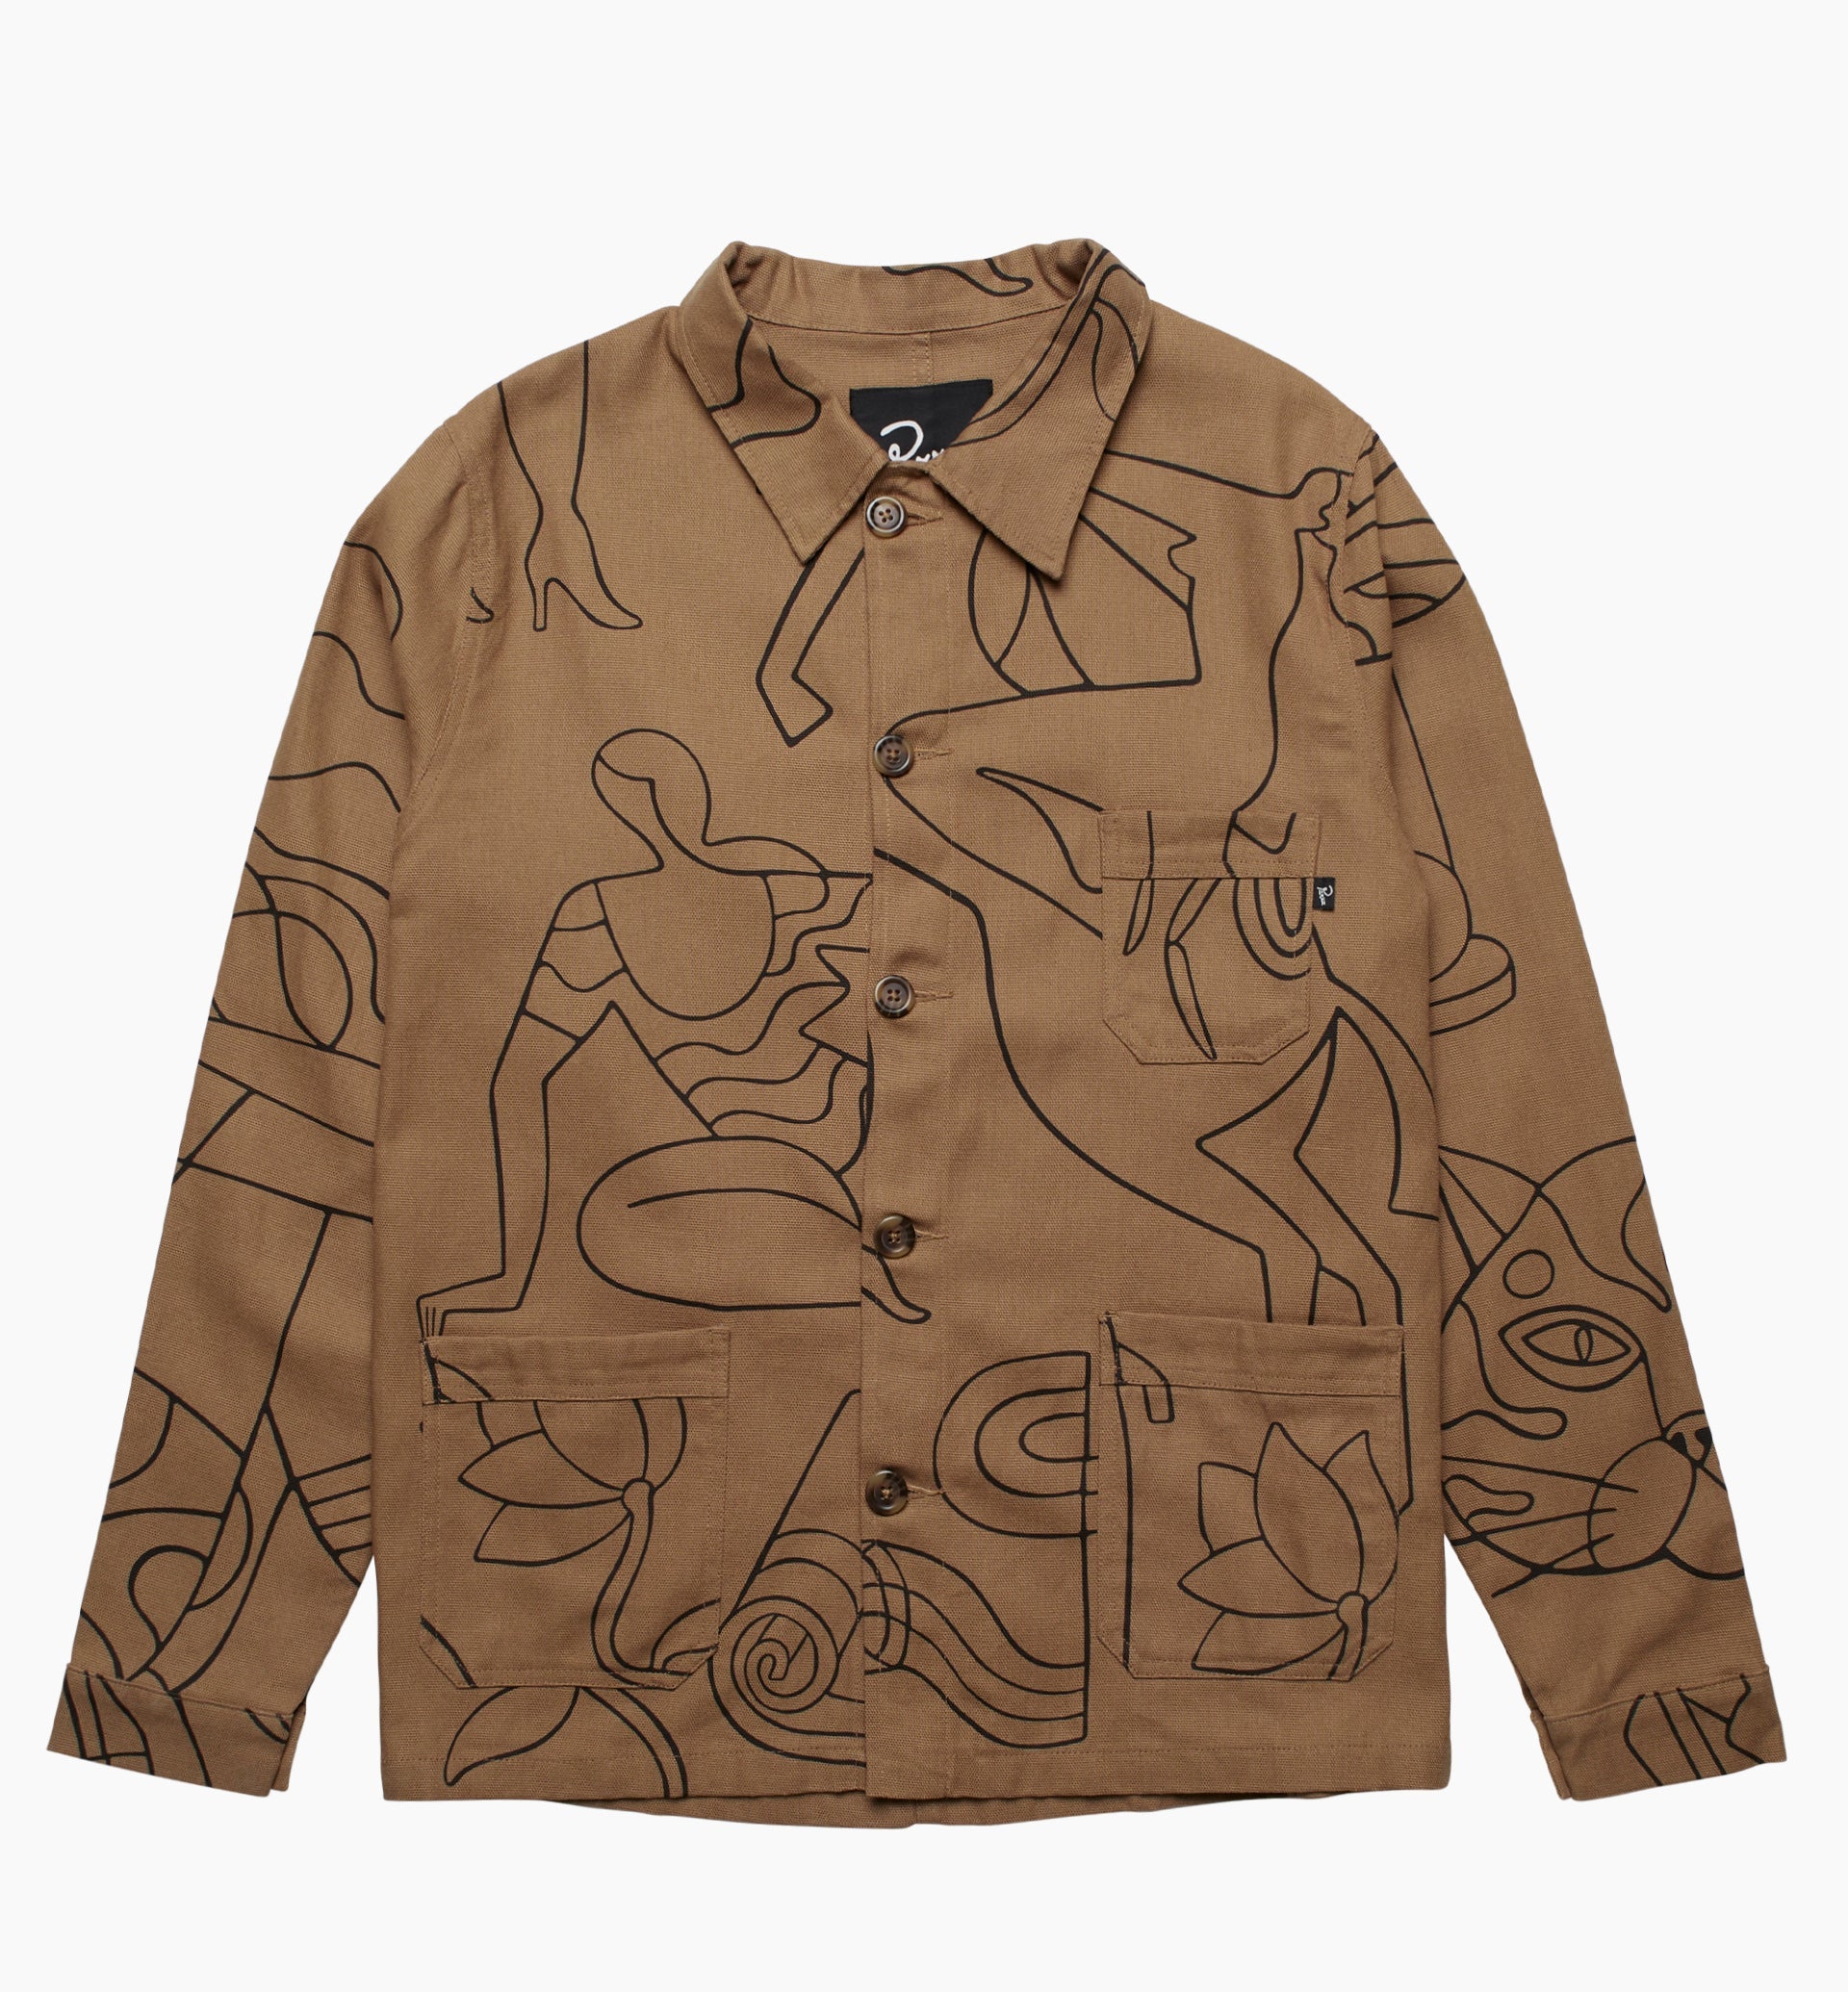 Parra - experience life worker jacket